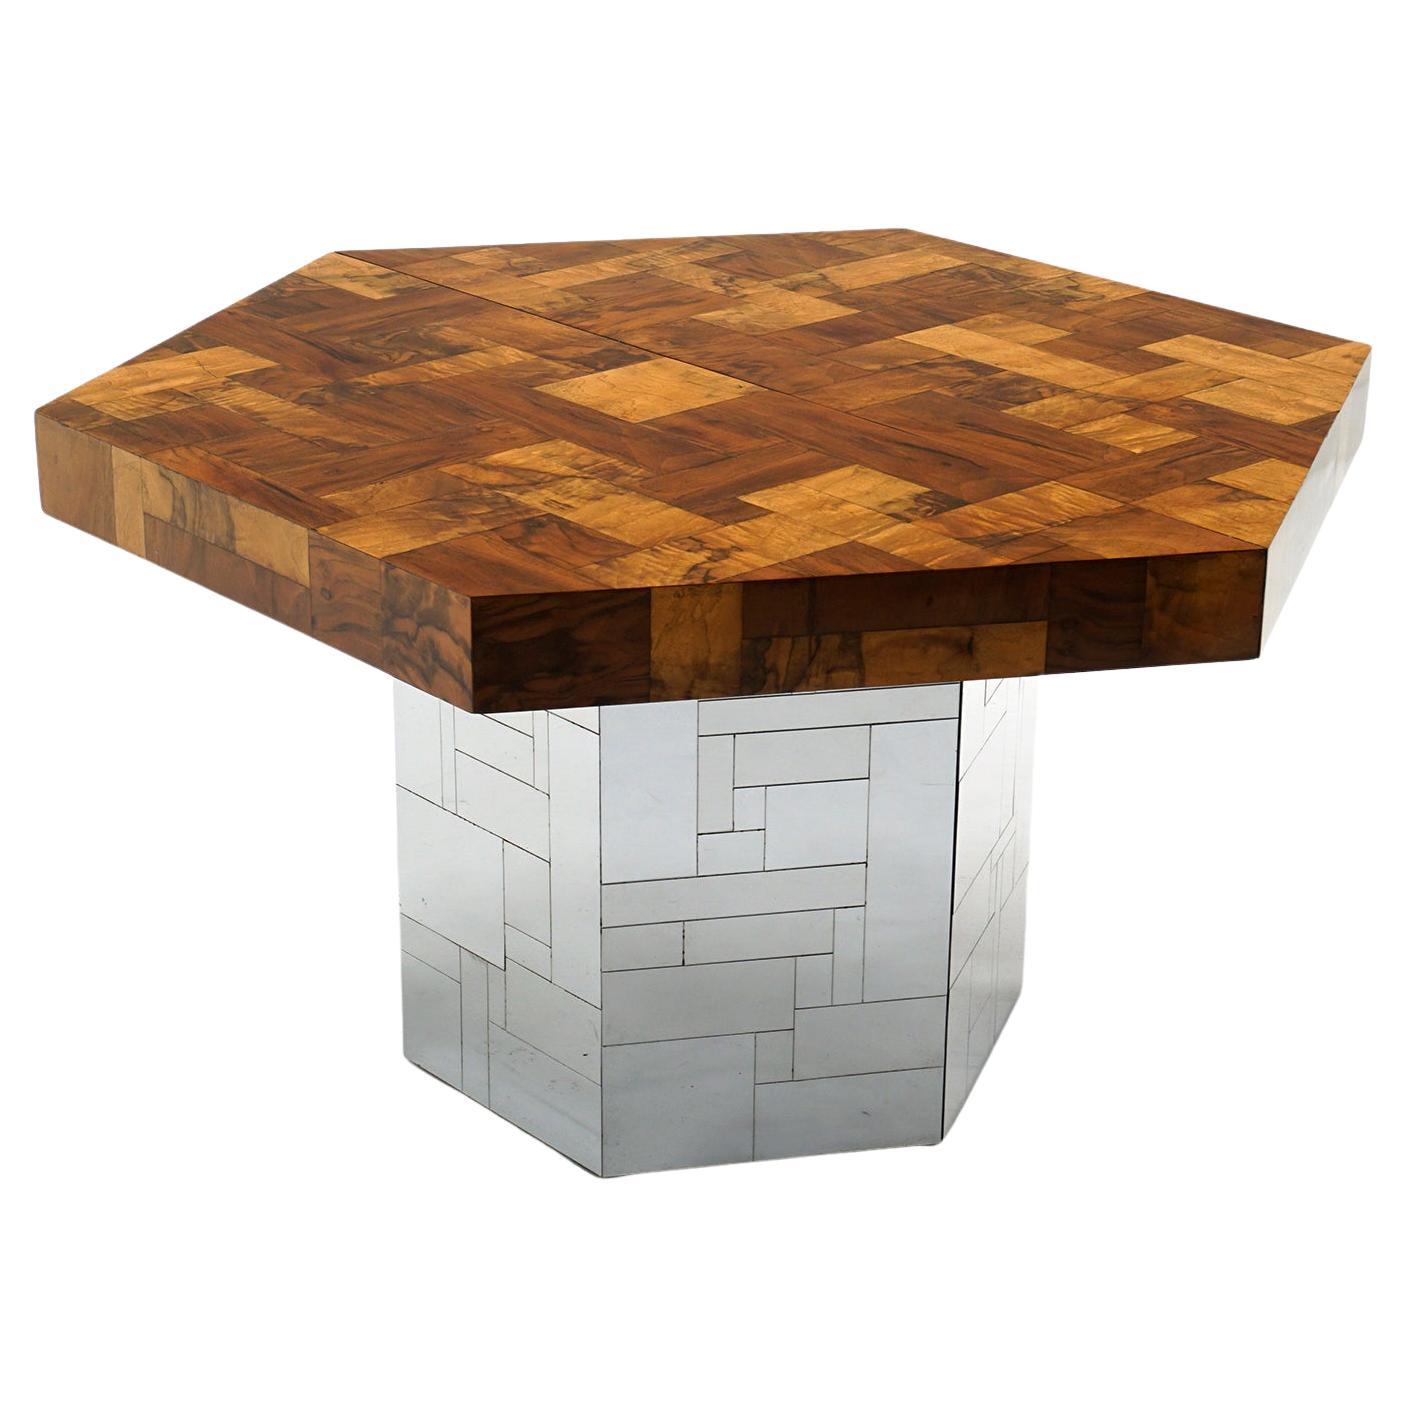 Stunning extension dining table designed by Paul Evans for his Cityscape series and manufactured by Directional.  Patchwork burl top and chrome base.  Without leaves it is a 47 inch hexagon. There are two 24 inch leaves that convert the top to an